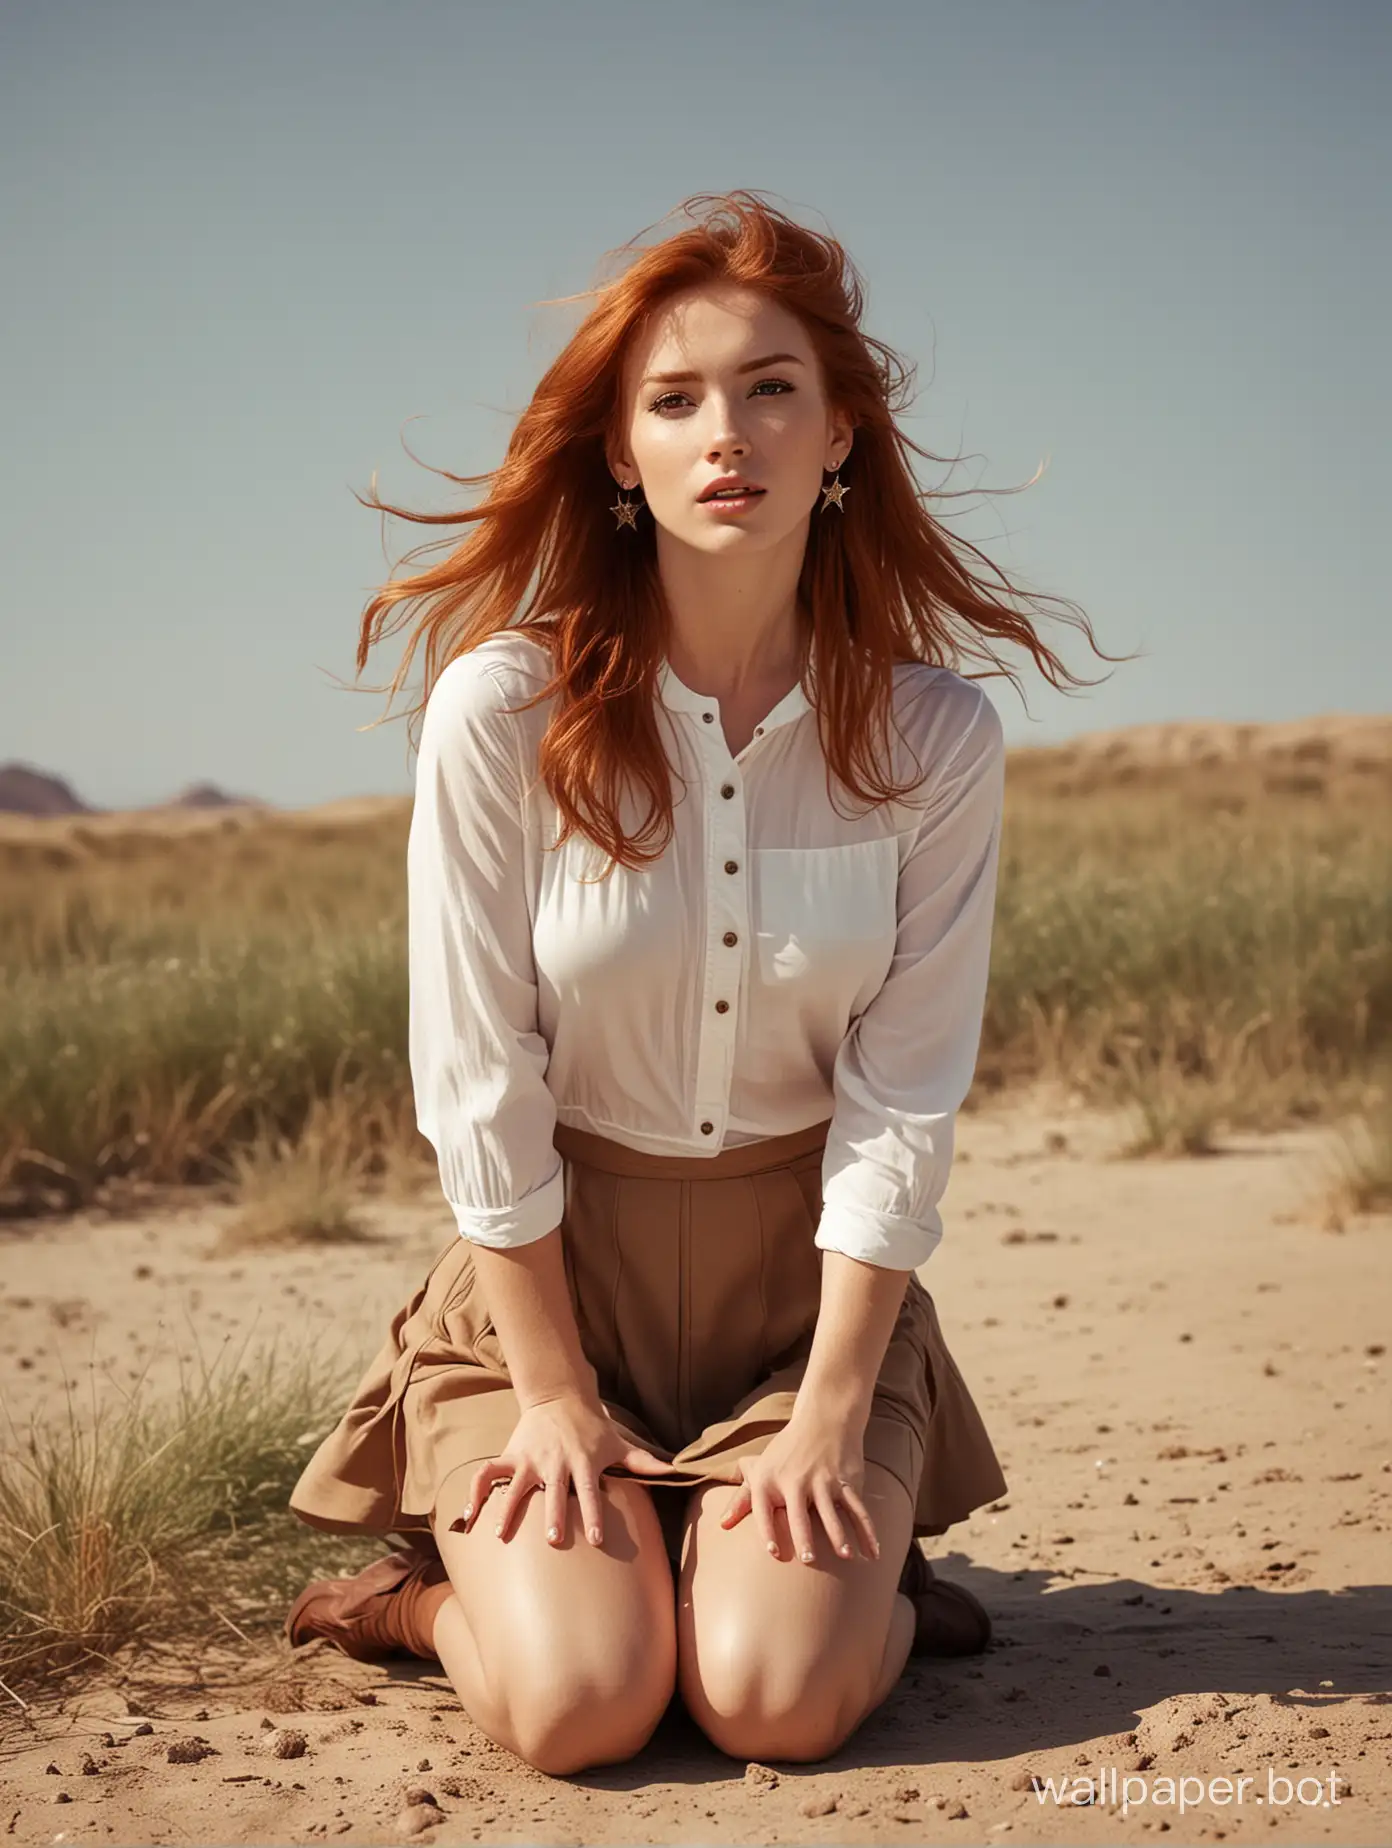 Vintage style. Redhead woman. Squatting pose. Long hair. White top. Short brown skirt. Small star-shaped earrings. Full body. Legs spread. Facing forward. Hair blowing in the wind.